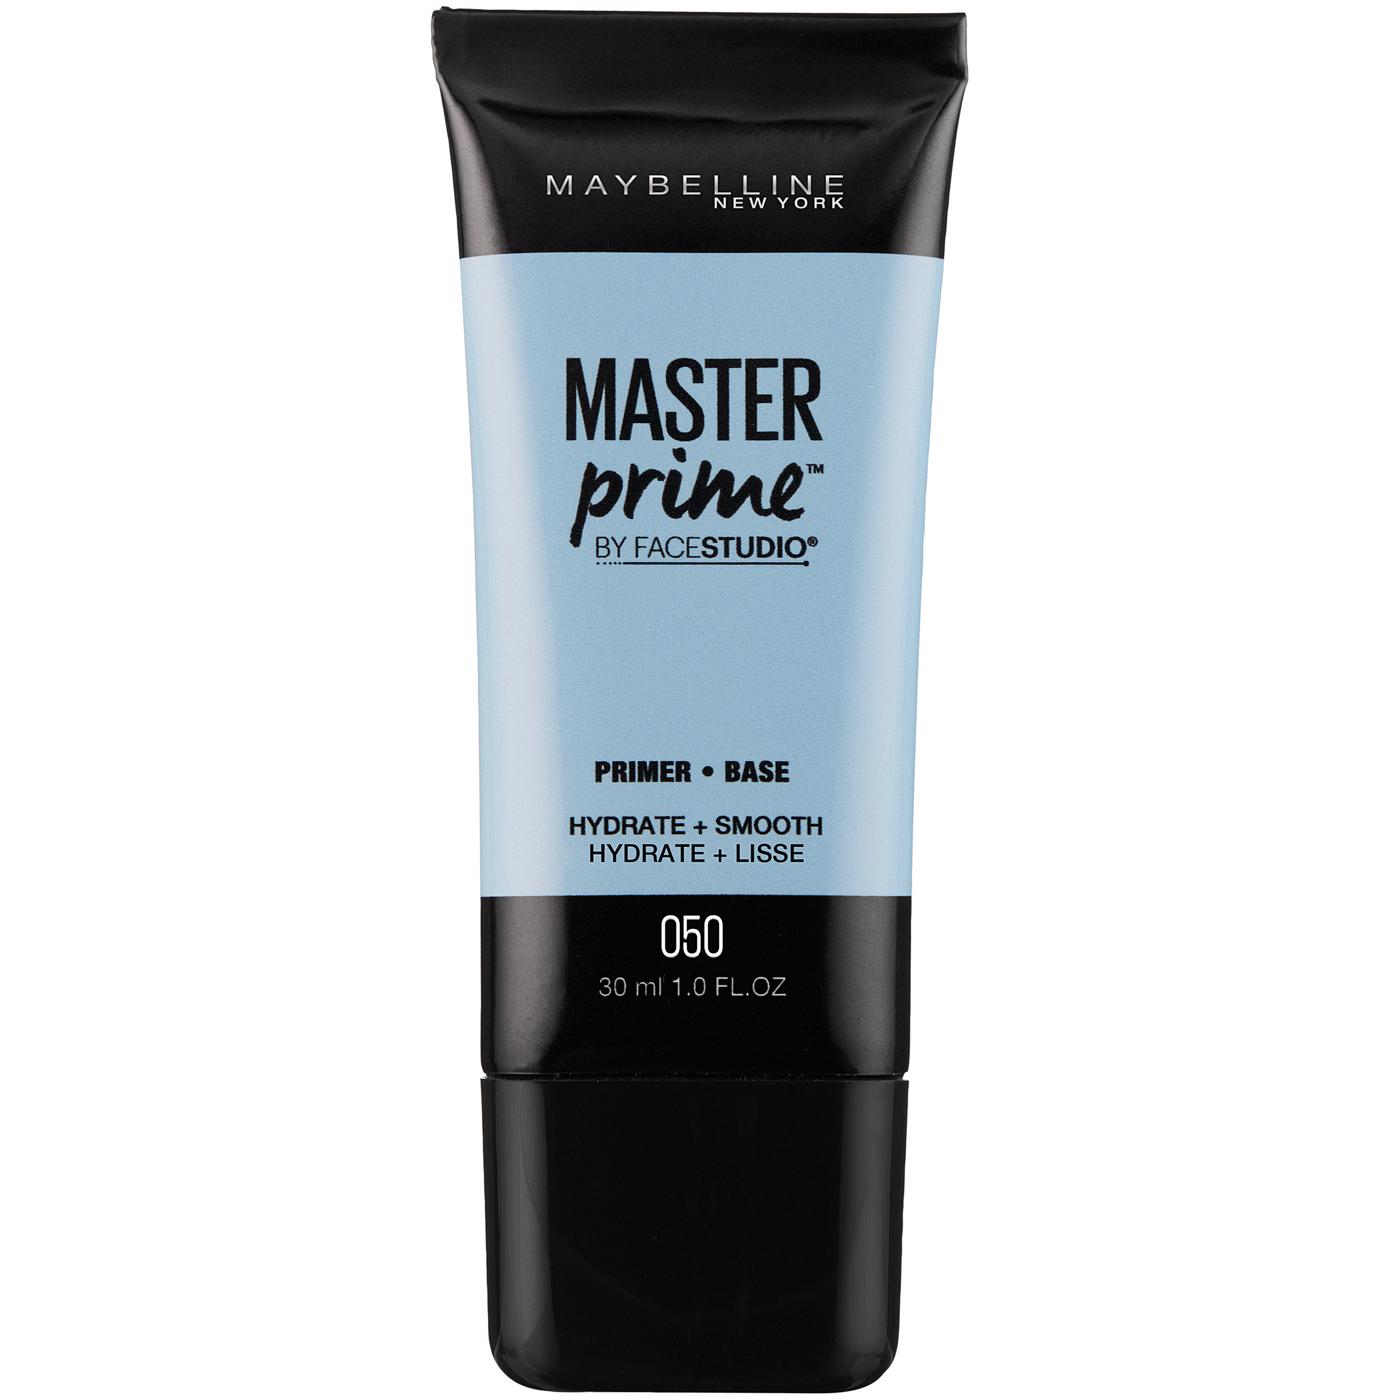 Maybelline Facestudio Master Prime Primer, Hydrate + Smooth; image 1 of 2